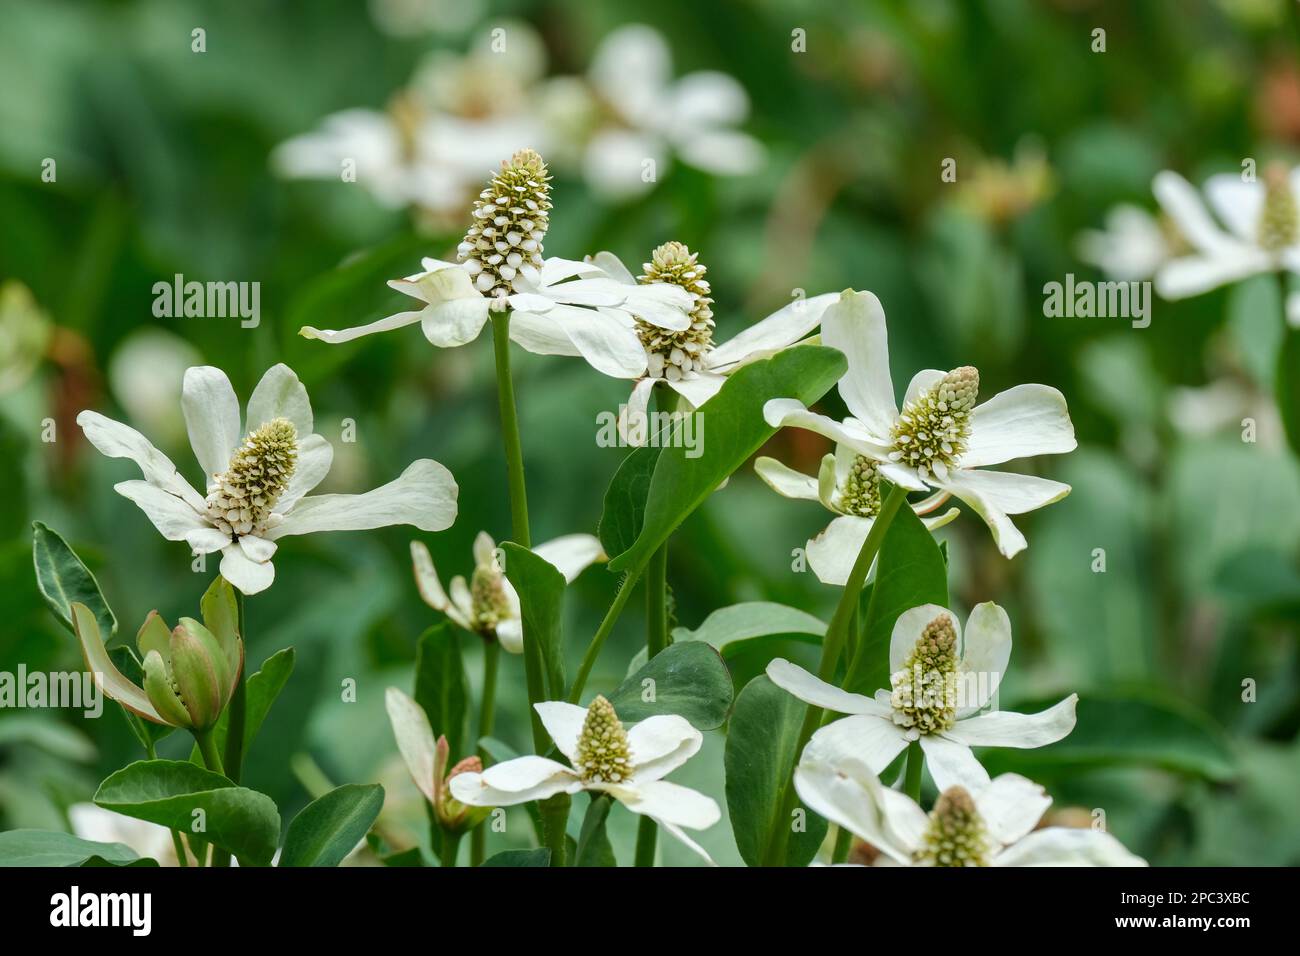 Anemopsis californica, yerba mansa, perennial herb, white, pale yellow or greenish flowers  clustered into a cone surrounded by ring bracts Stock Photo